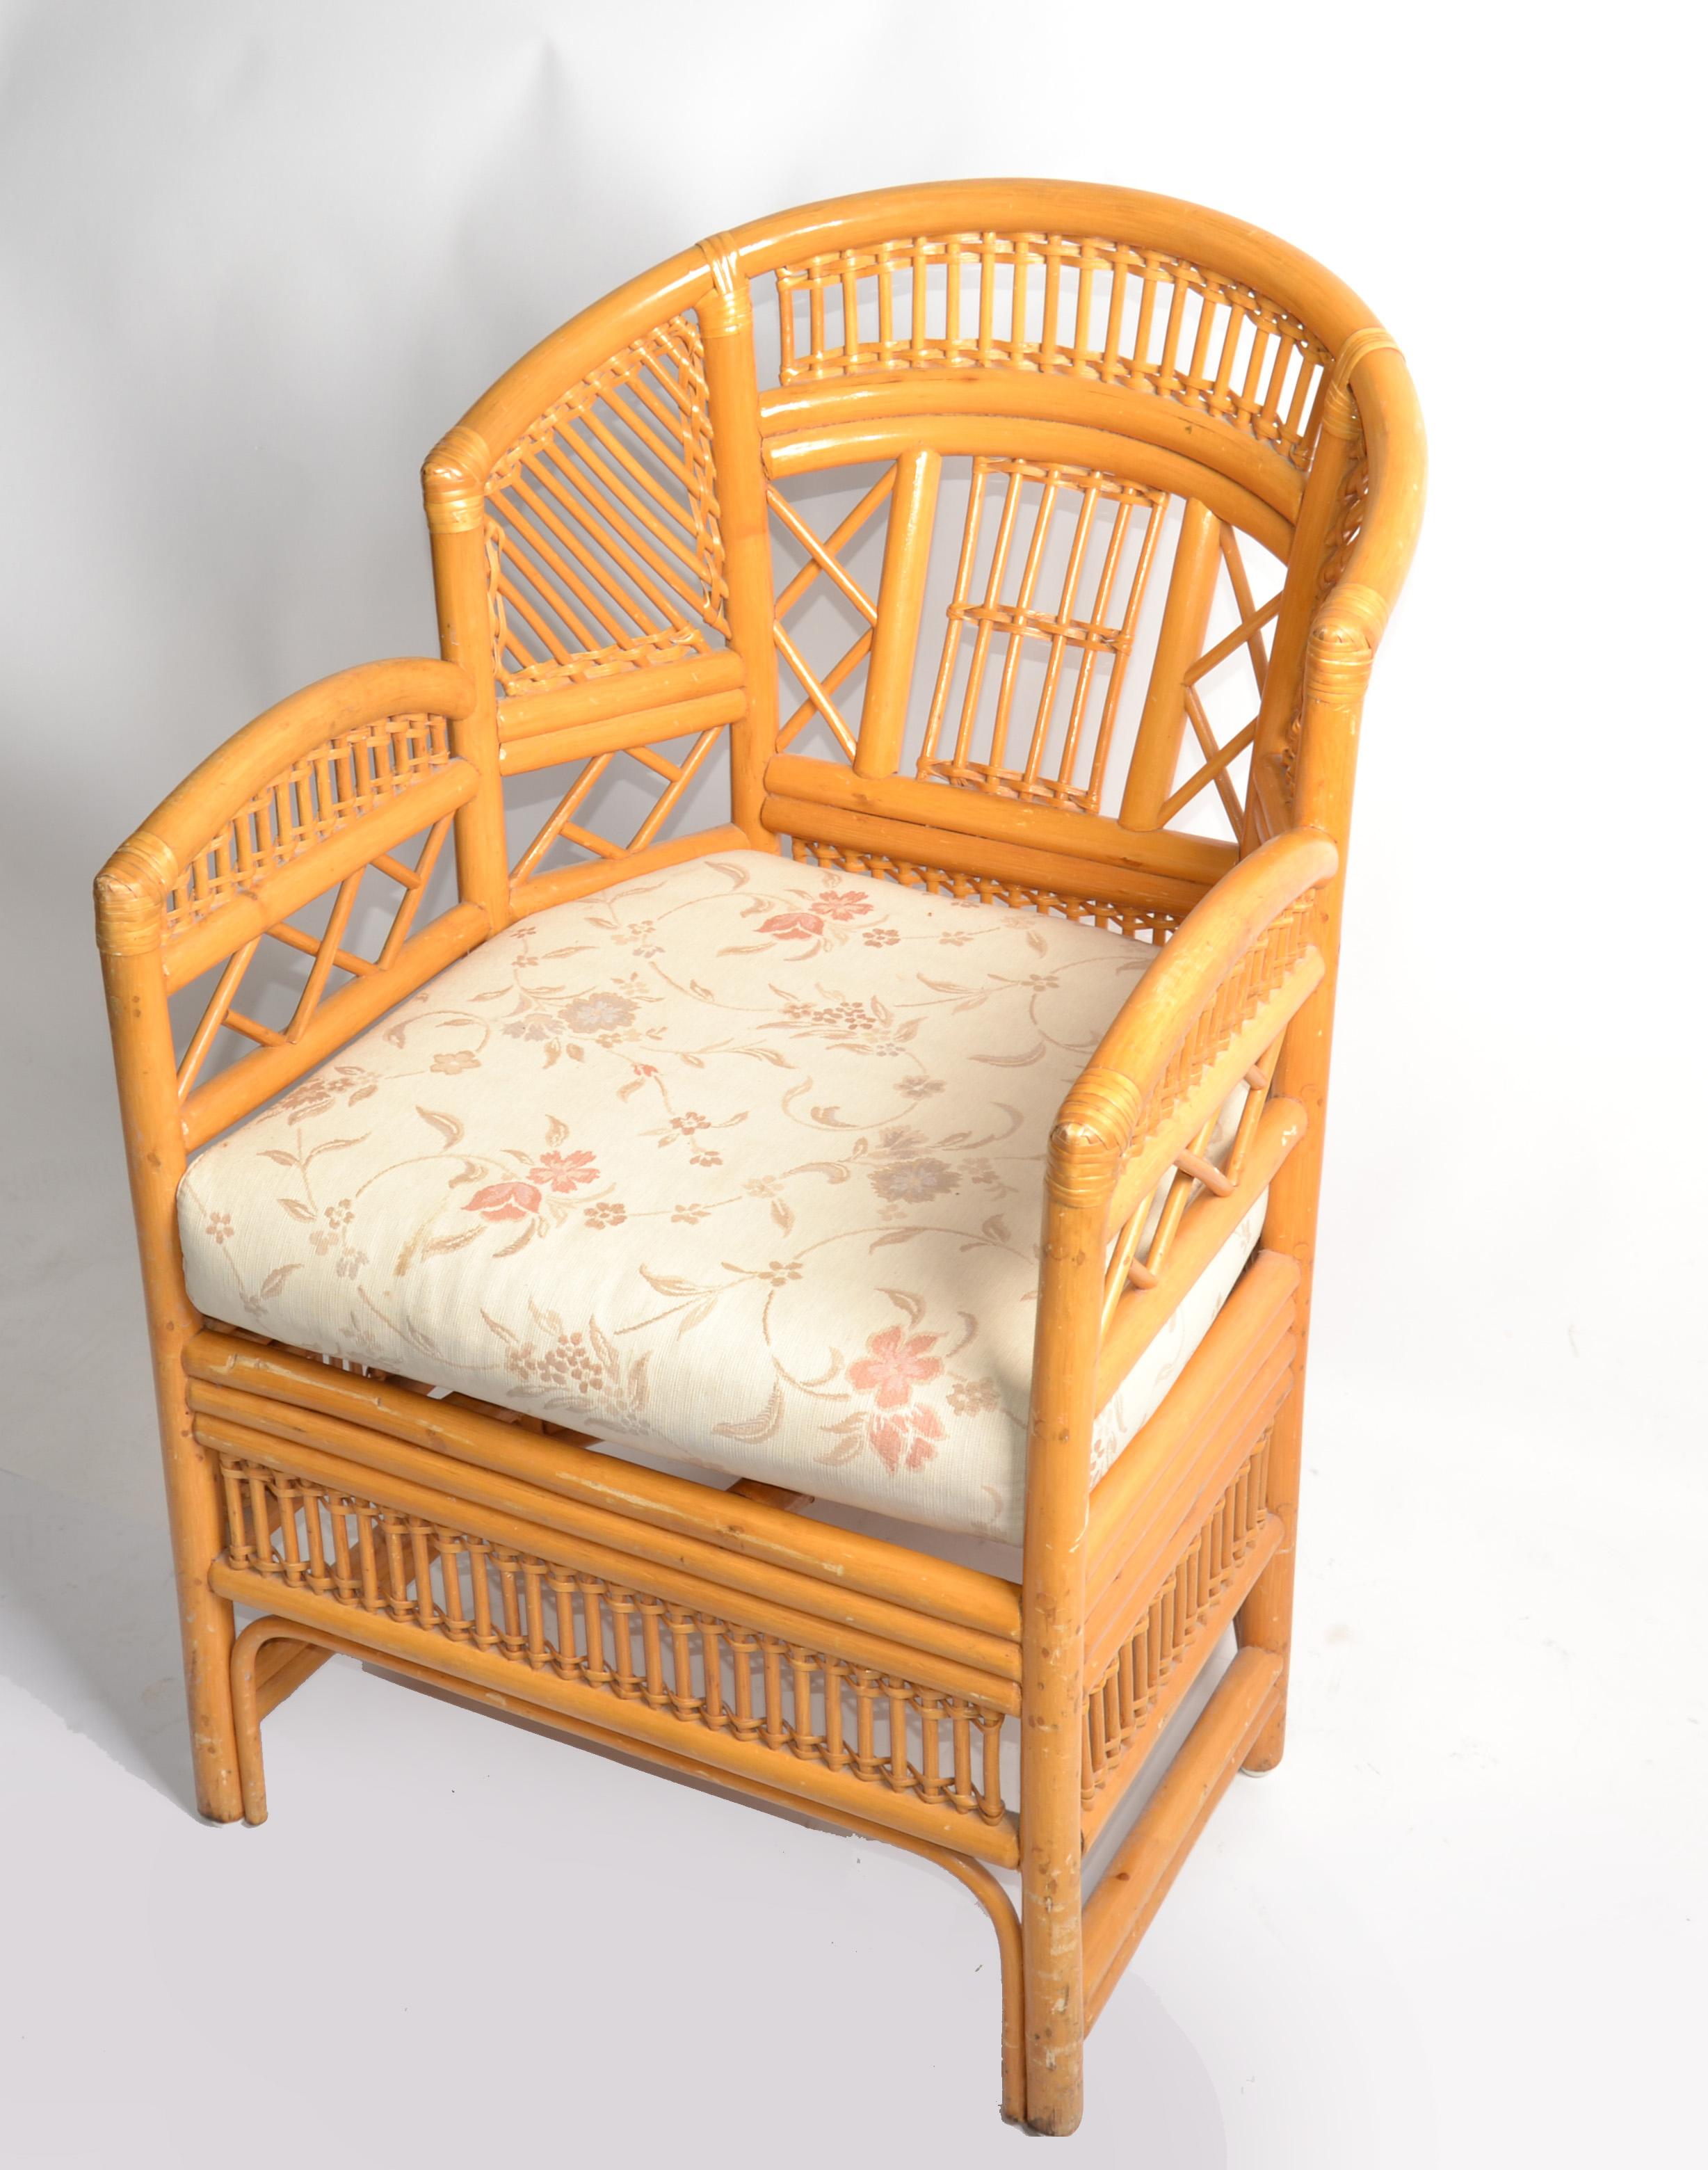 Vintage blonde bamboo, caning and split reed armchair on six legs. This is a handcrafted chair with woven cane seat features bamboo frames and Chinese inspired bamboo patterns.
The backrests are designed with an extraordinary pattern as shown in the